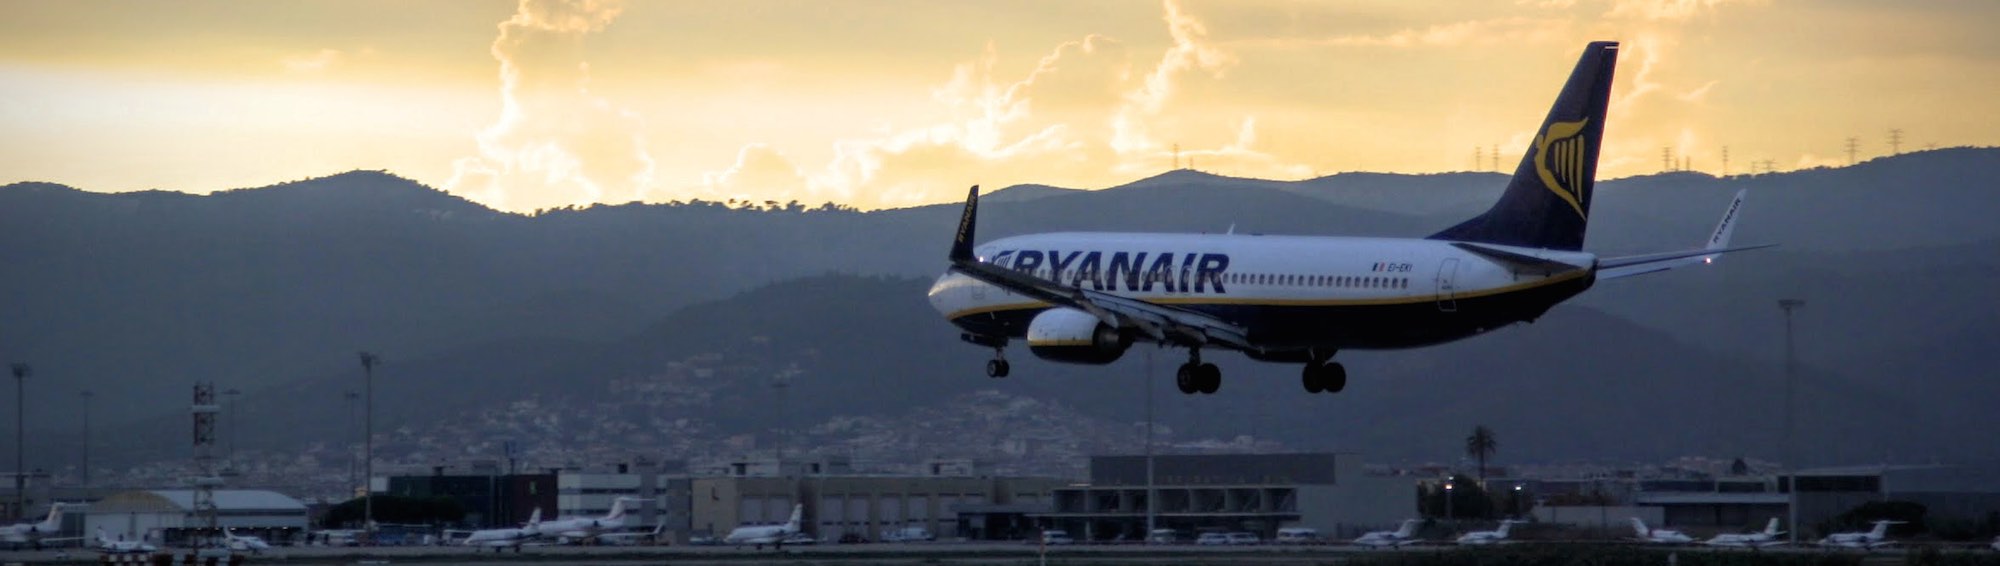 Best time to book flights for Newquai (NQY) to Malaga (AGP) flights with Ryanair at AirHint